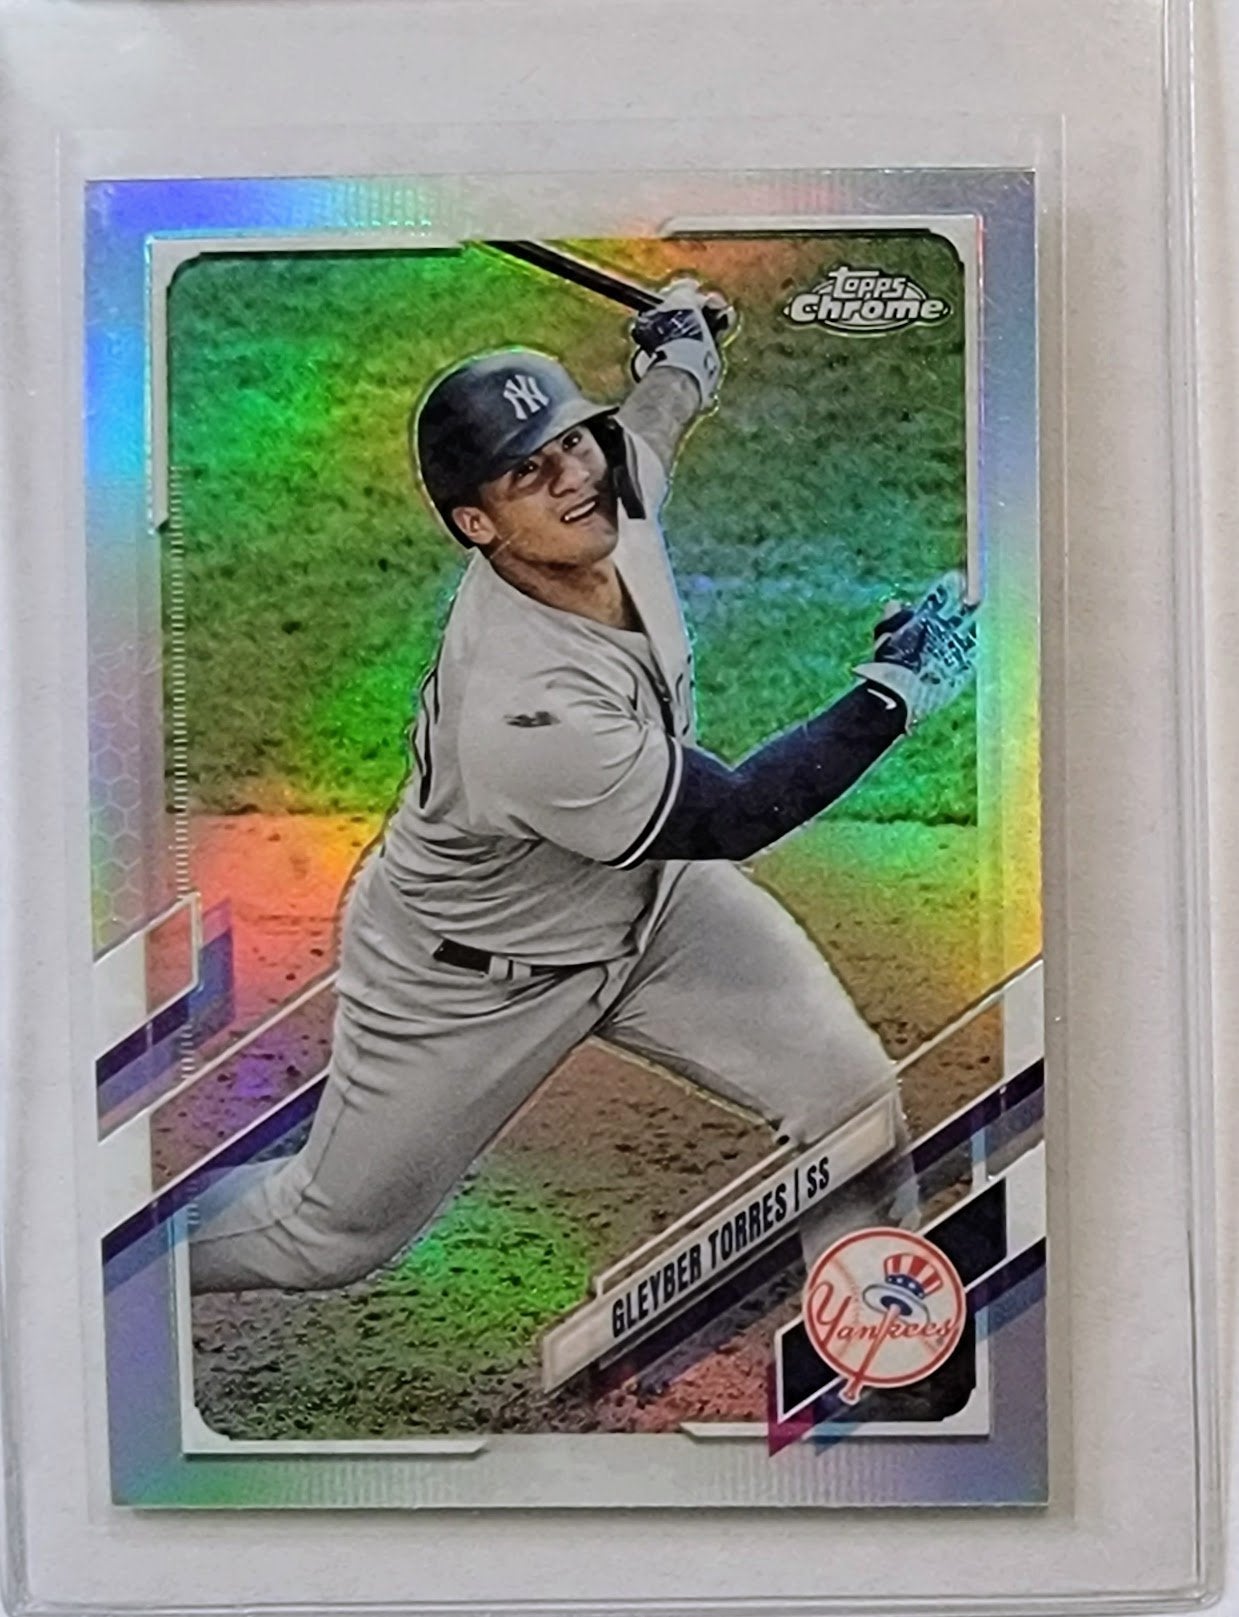 2021 Topps Chrome Gleyber Torres Refractor Baseball Trading Card TPTV simple Xclusive Collectibles   